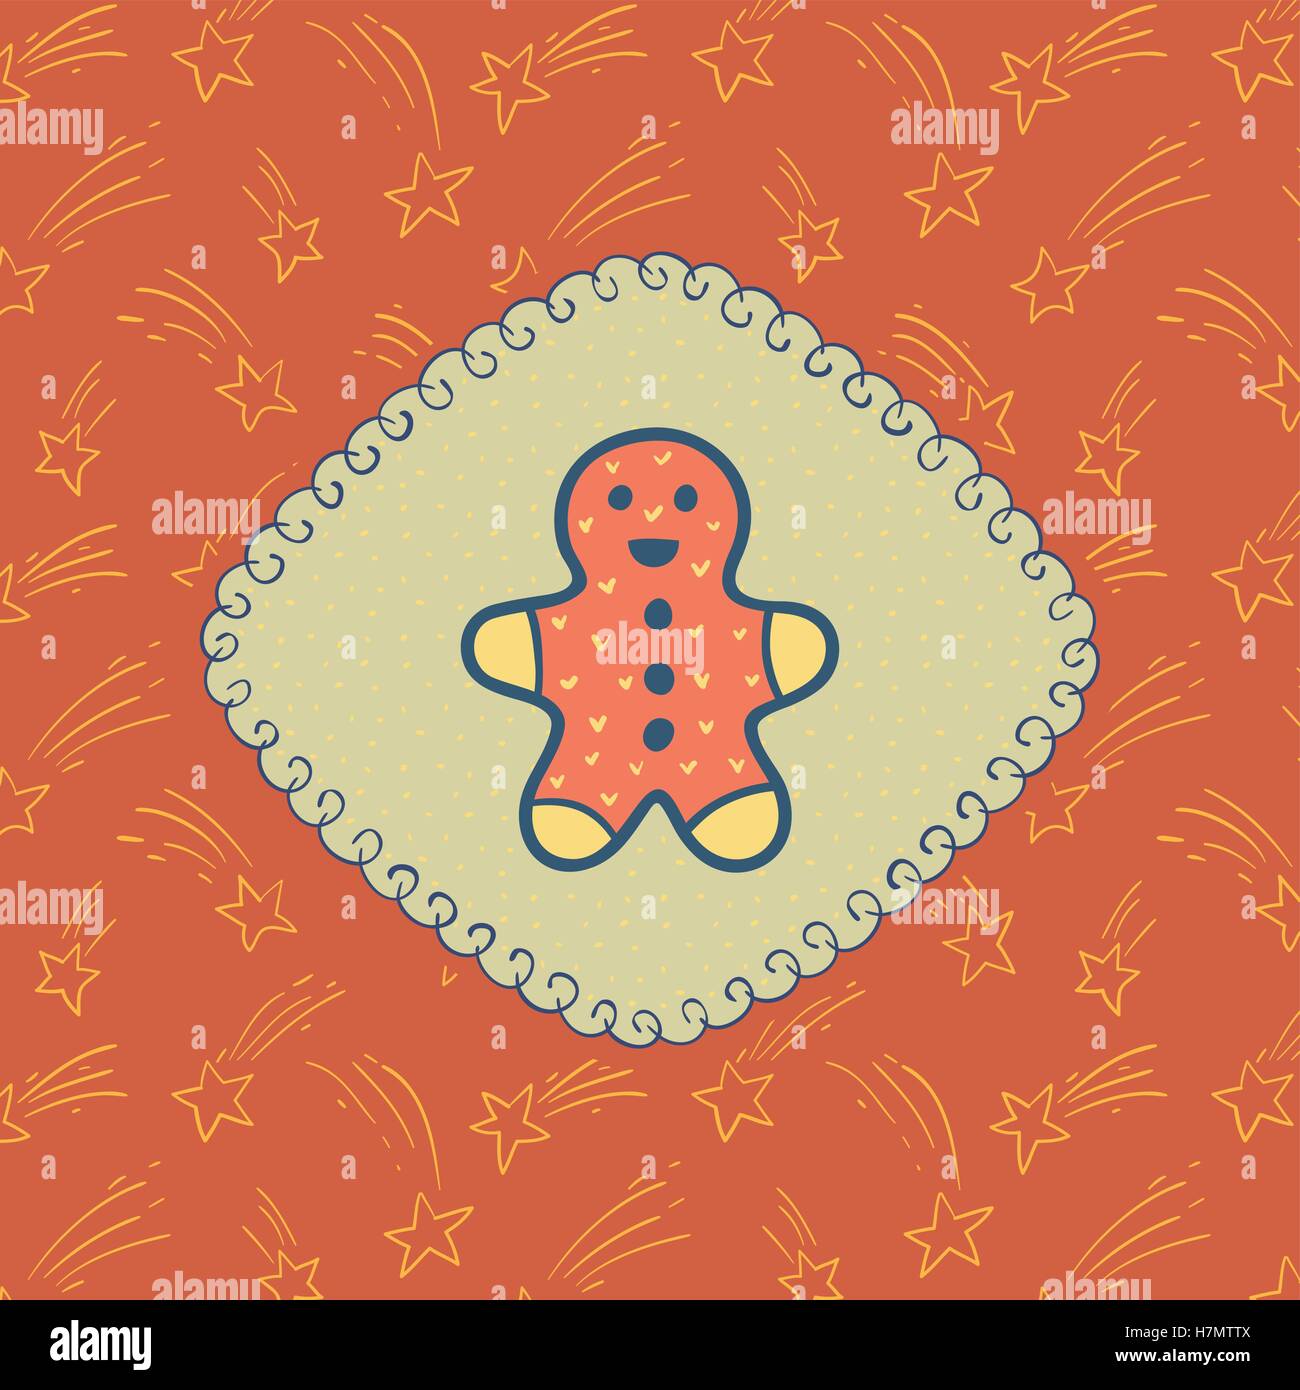 Christmas and New Year vintage ornate frame with Gingerbread Man symbol. Doodle illustration greeting card. Stock Vector